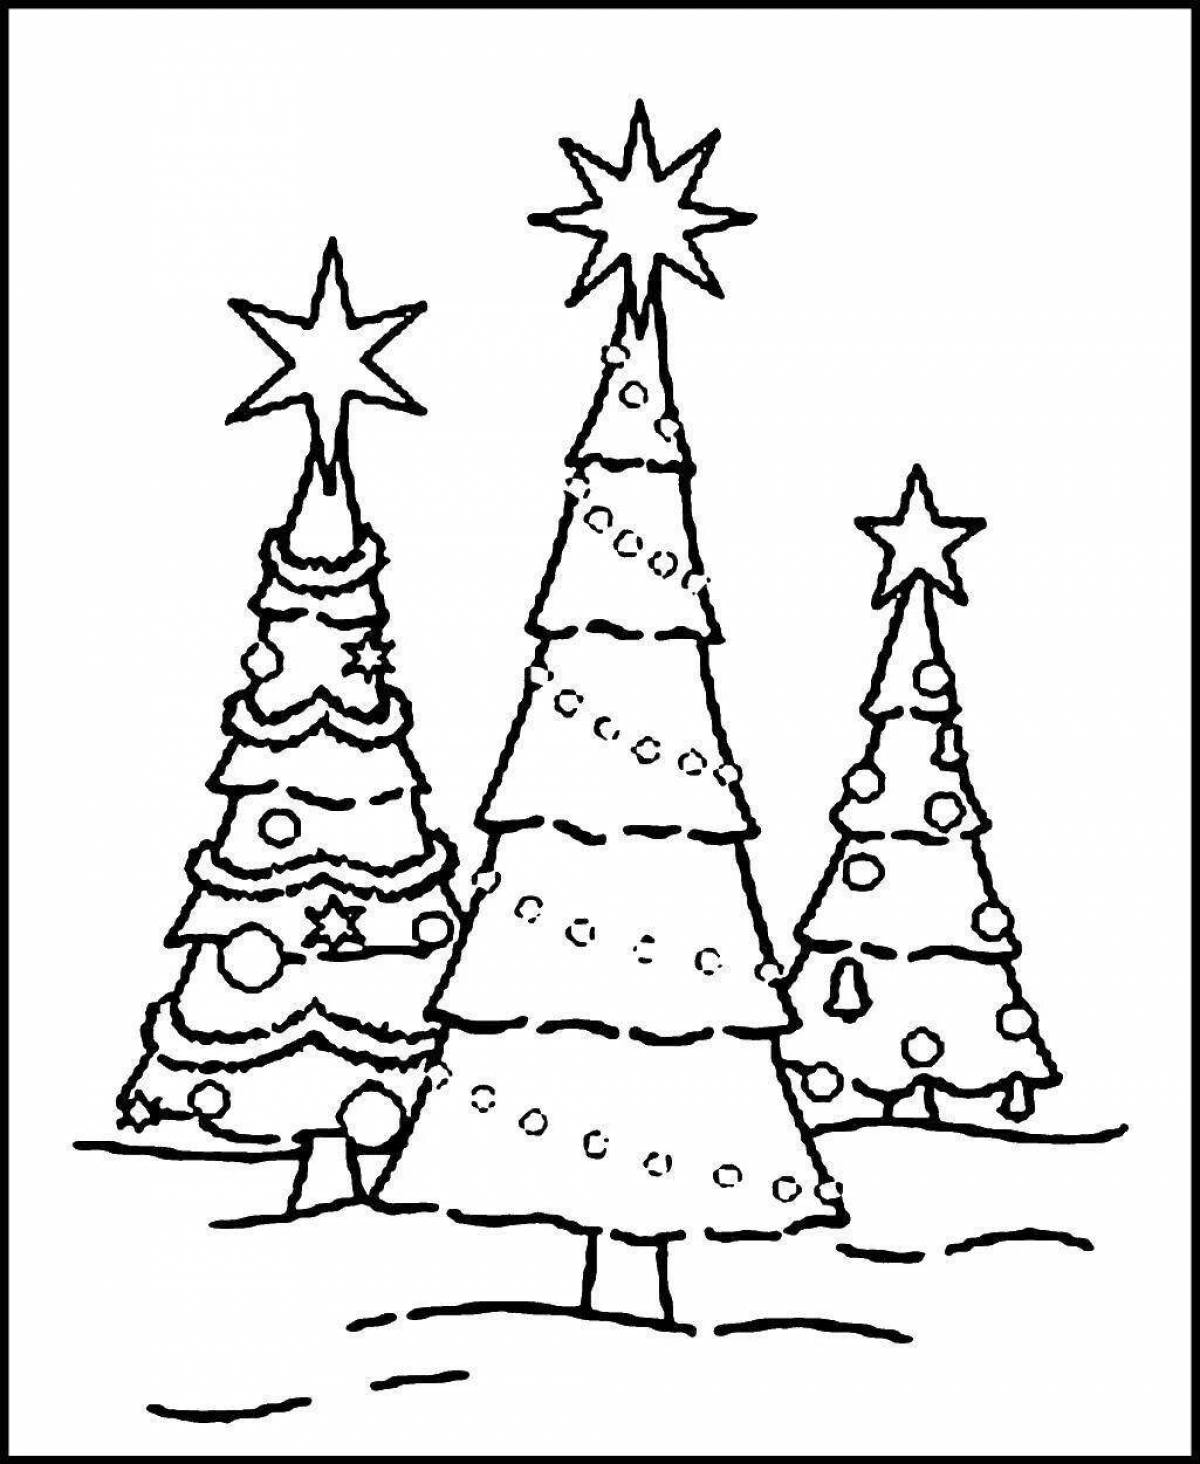 Merry Christmas tree coloring book